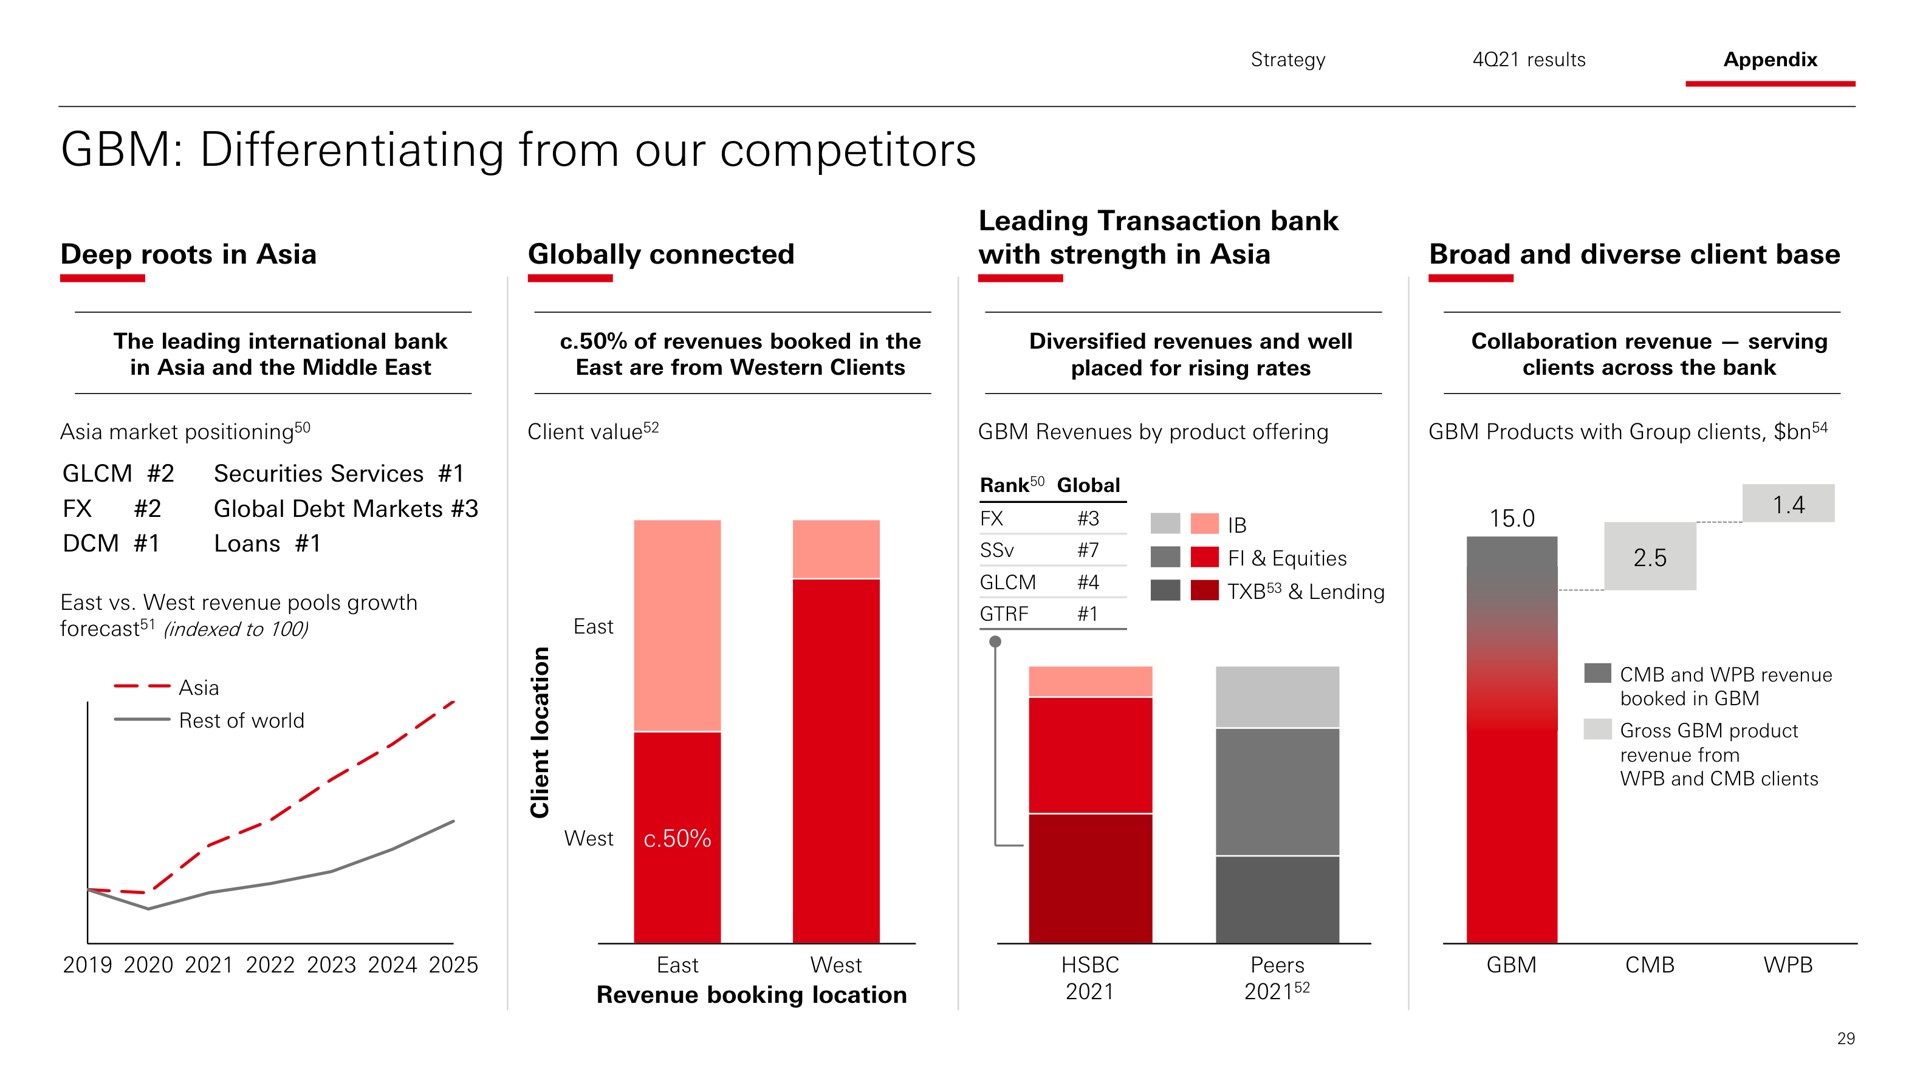 differentiating from our competitors | HSBC